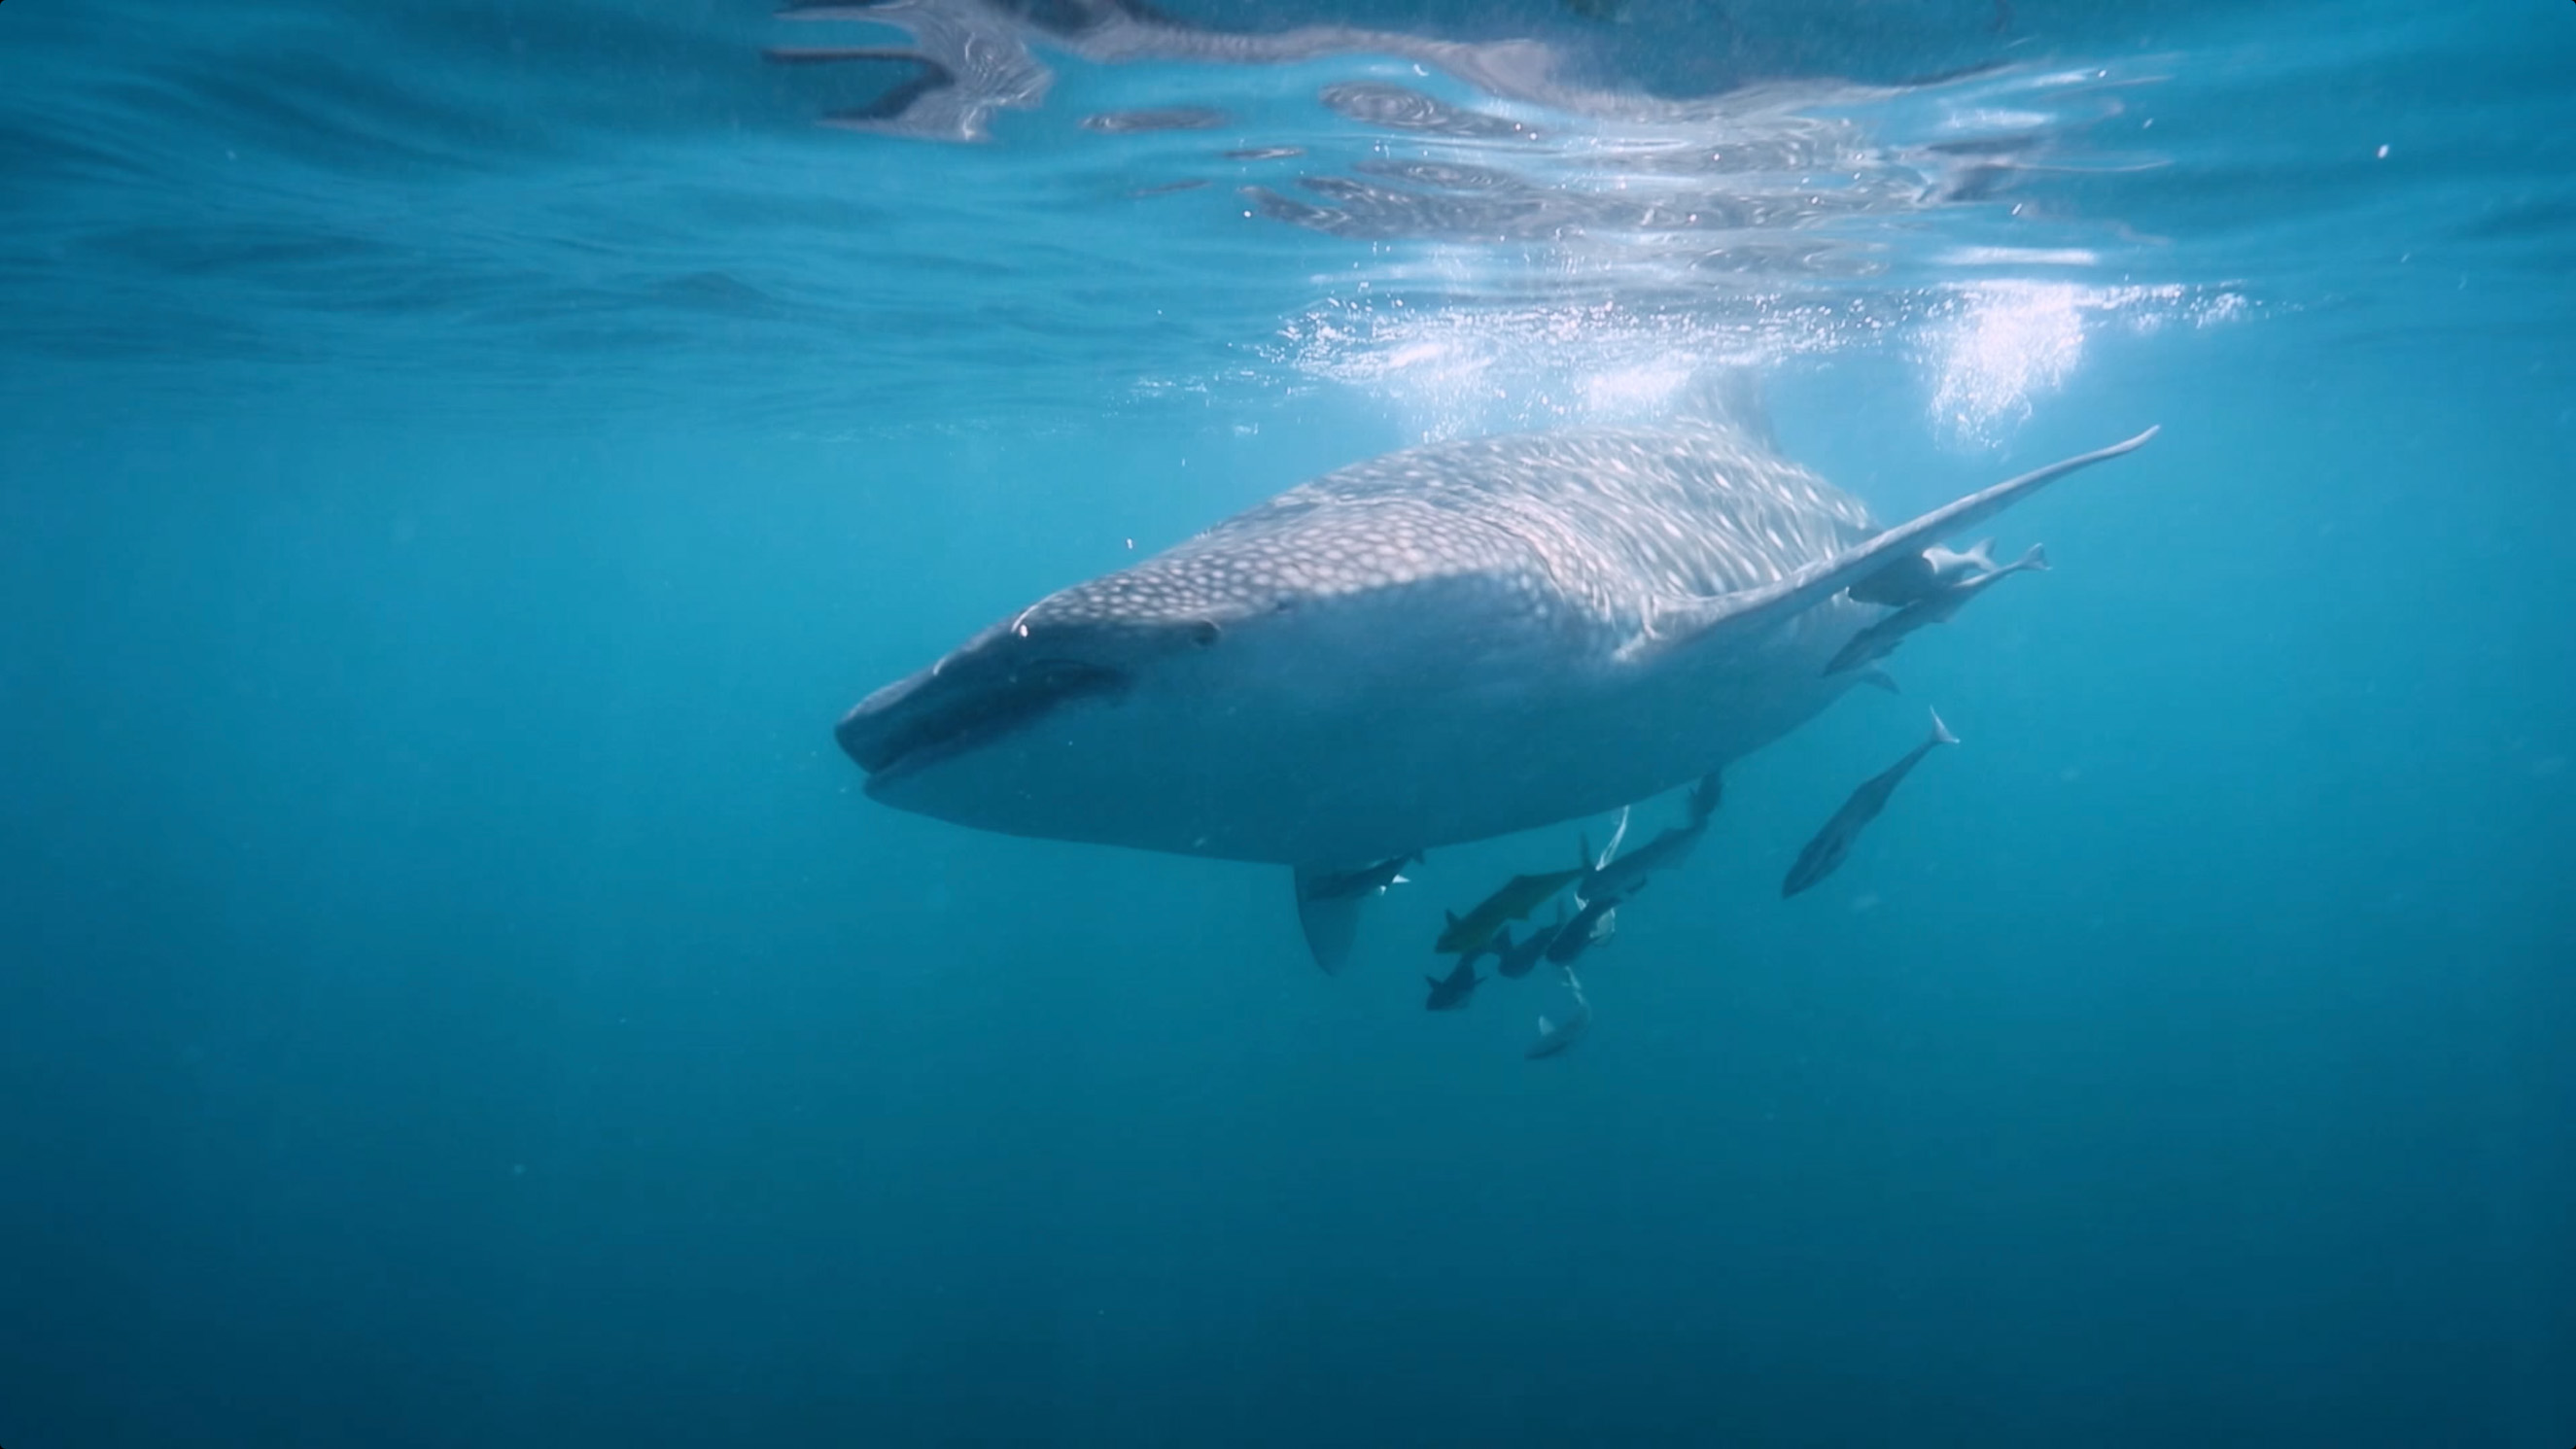 Image of "Discover the Whale Sharks of Qatar"